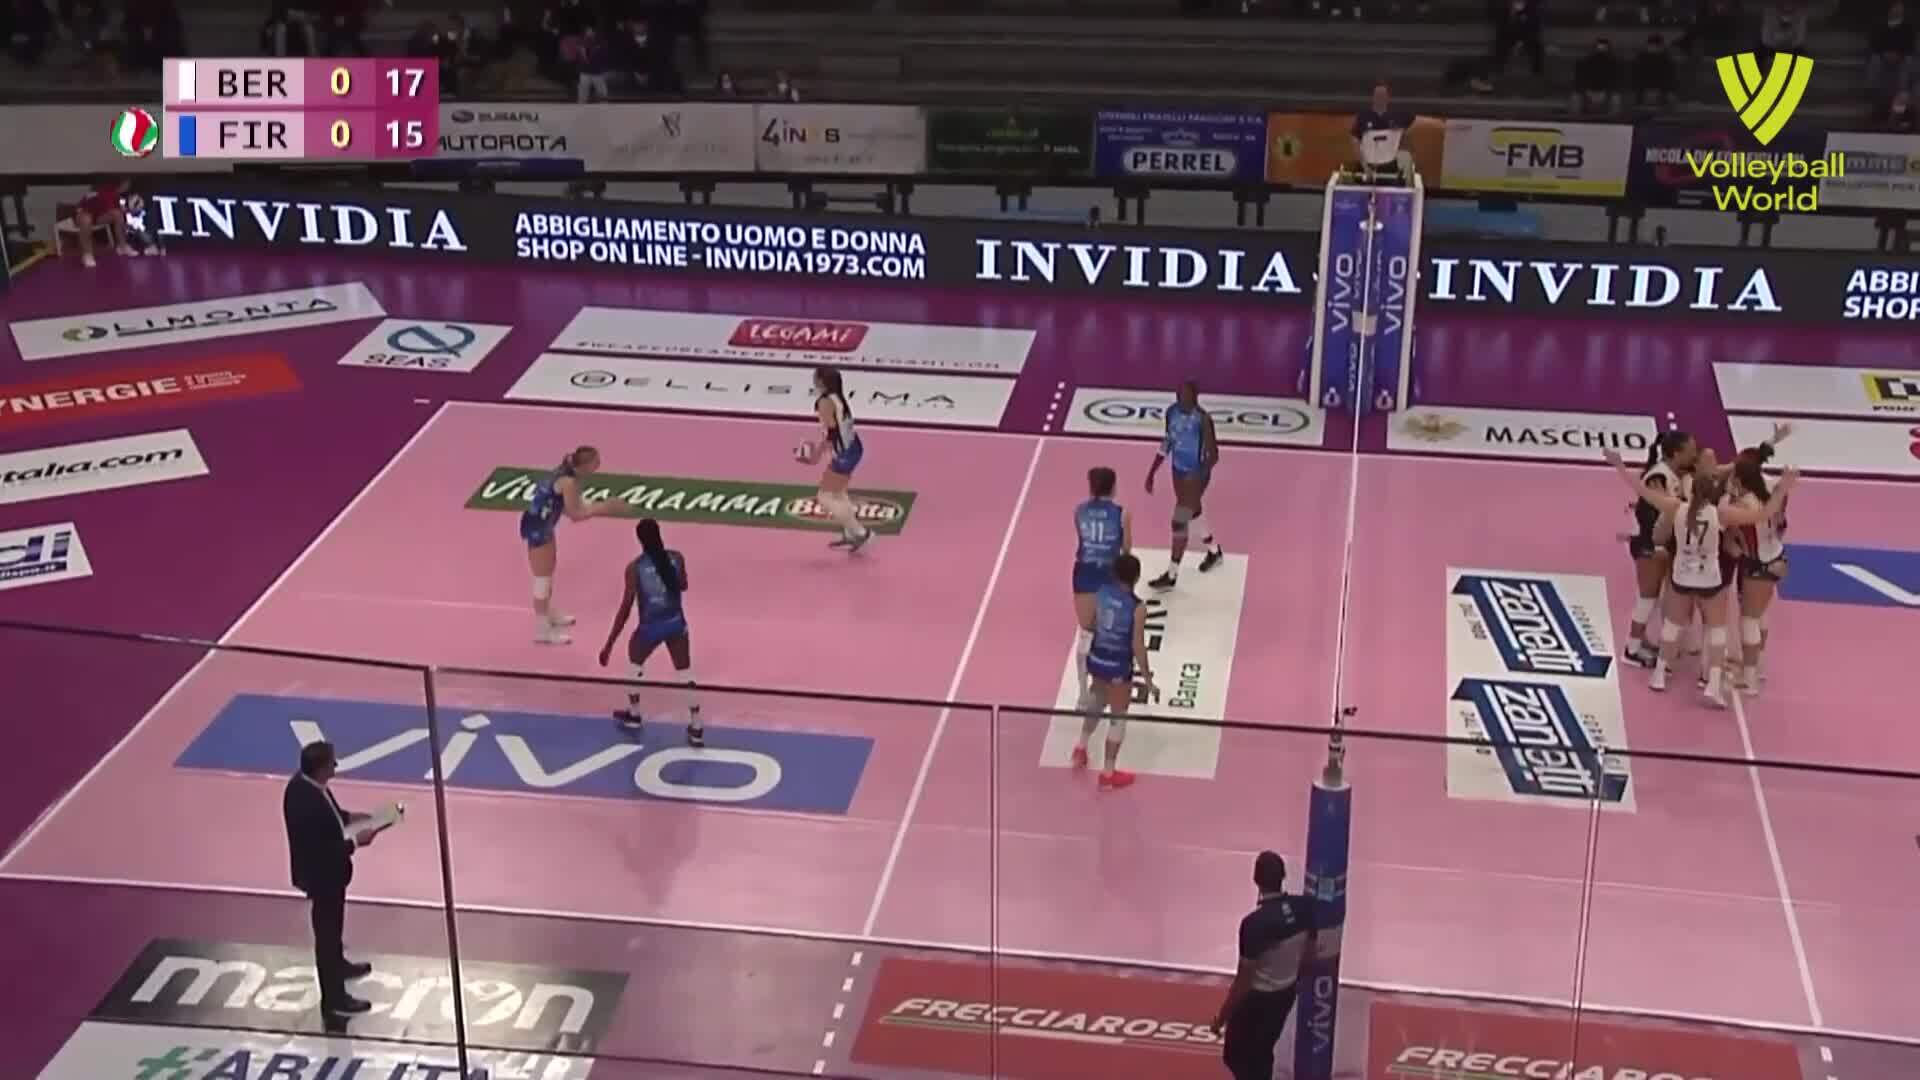 Top Plays from Volley Bergamo 1991 vs. Il Bisonte Firenze_4868605 ...